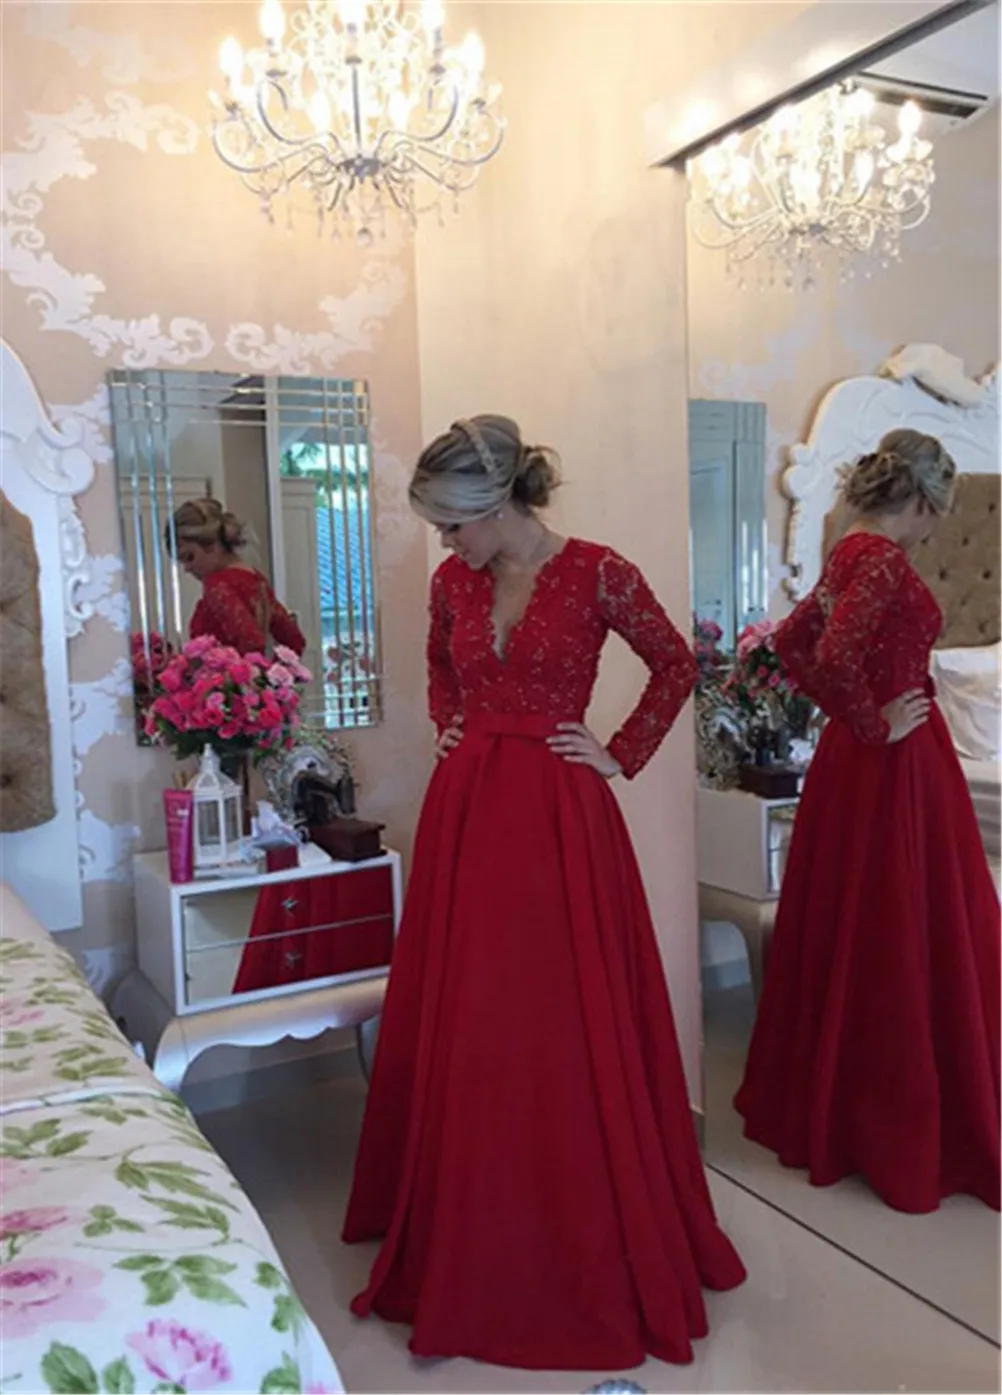 Delicate Red Chiffon Lace Prom Dress Pearls Long Sleeve V-neck Illusion Back Long Evening Dress formal evening gowns dresses